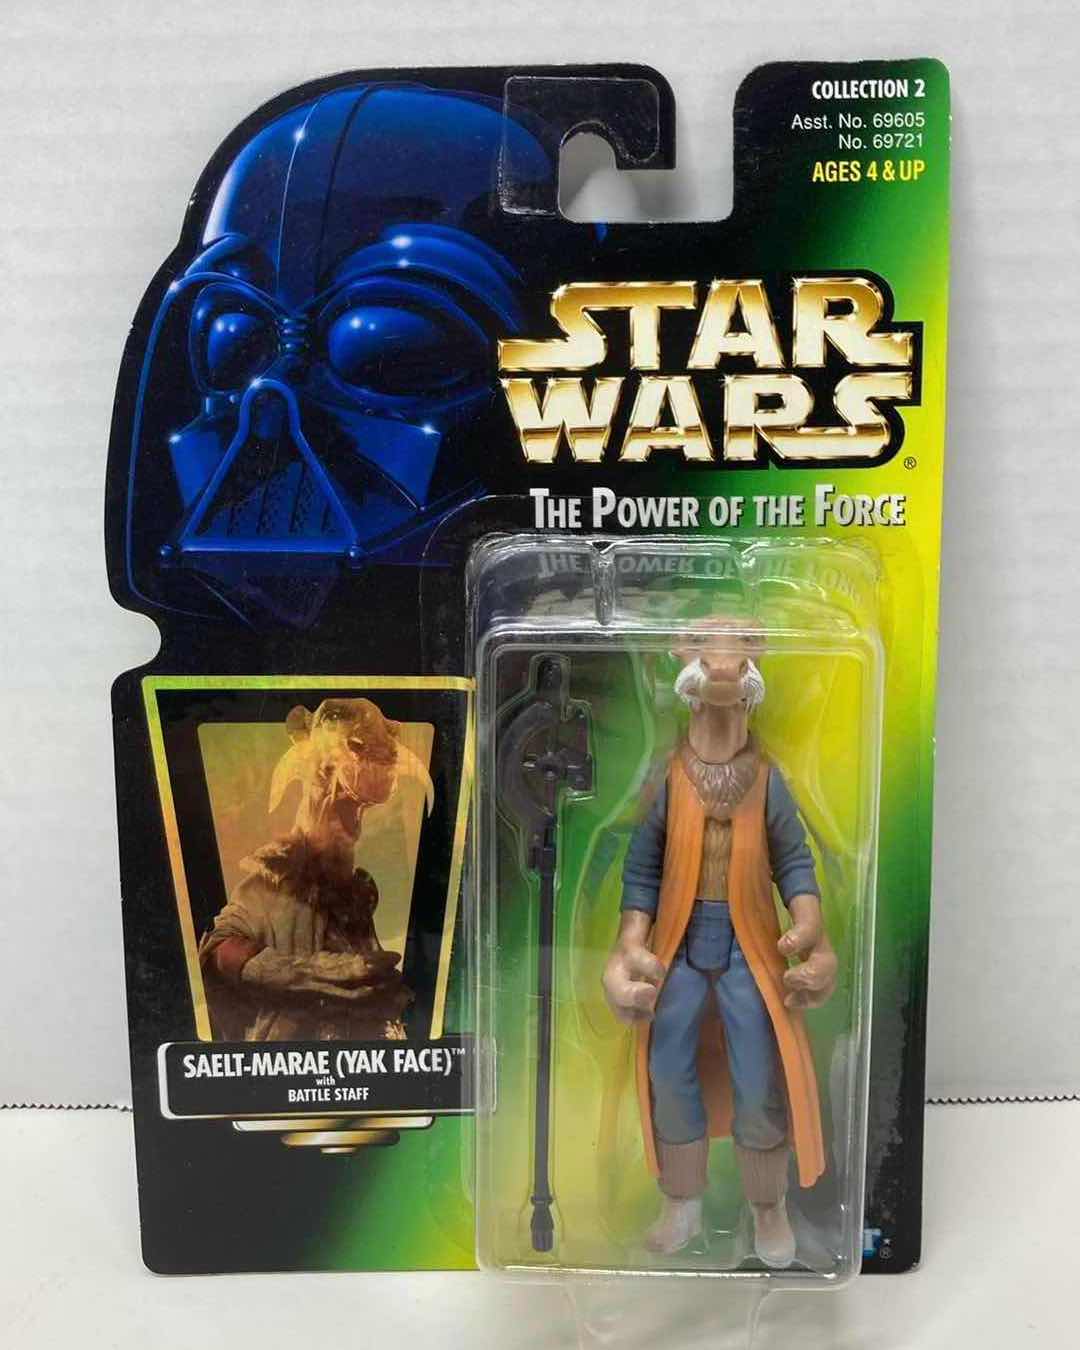 Photo 1 of NEW STAR WARS THE POWER OF THE FORCE ACTION FIGURE, SAELT-MARAE (YAK FACE) W BATTLE STAFF